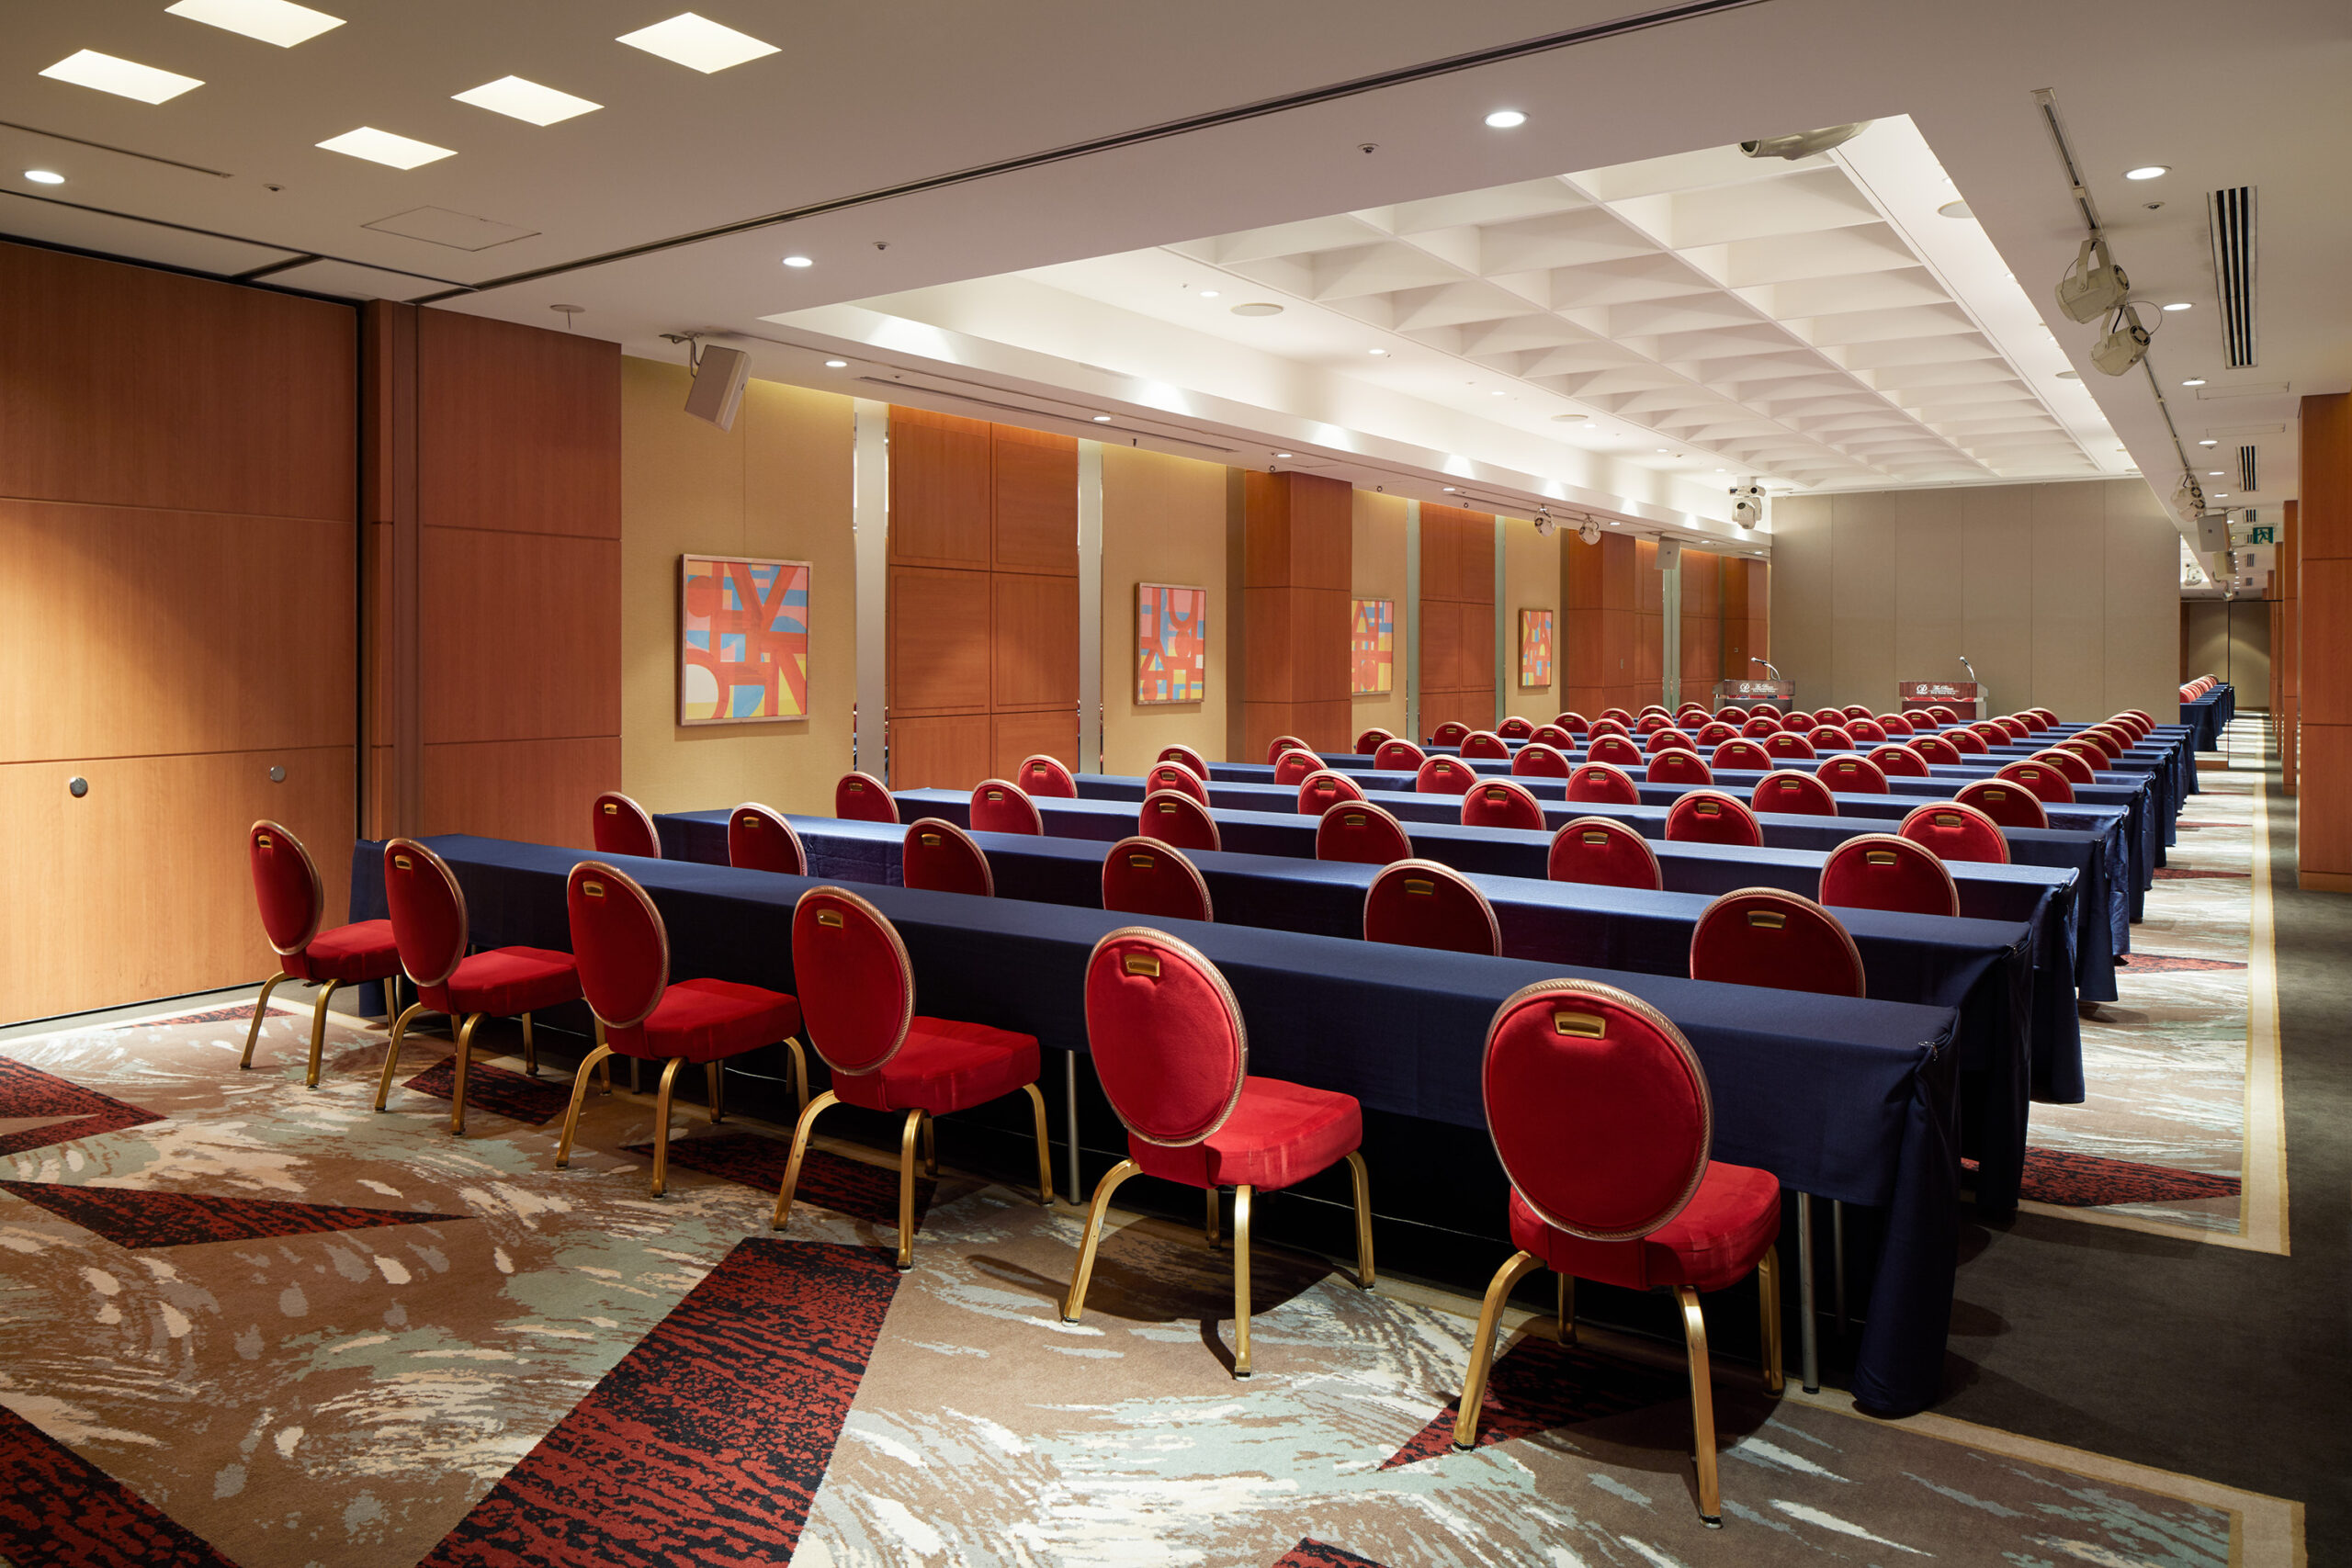 Small ＆Medium-sized Banquet Rooms